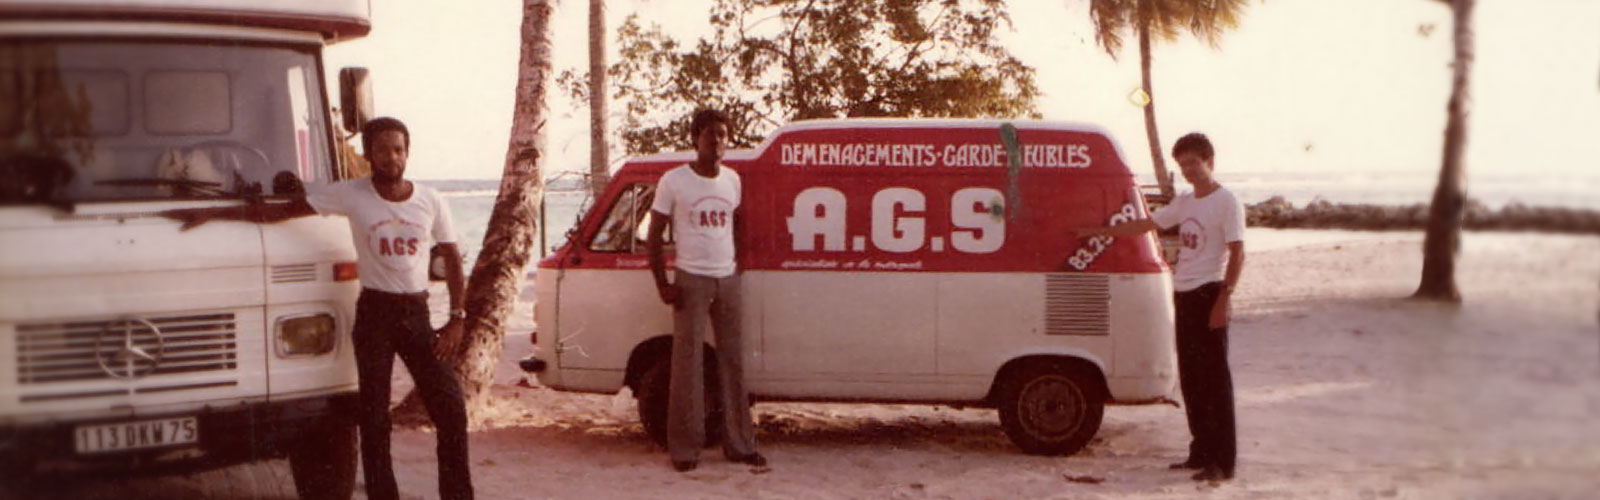 AGS Guadeloupe 3 men posing with movers trucks in the 70s